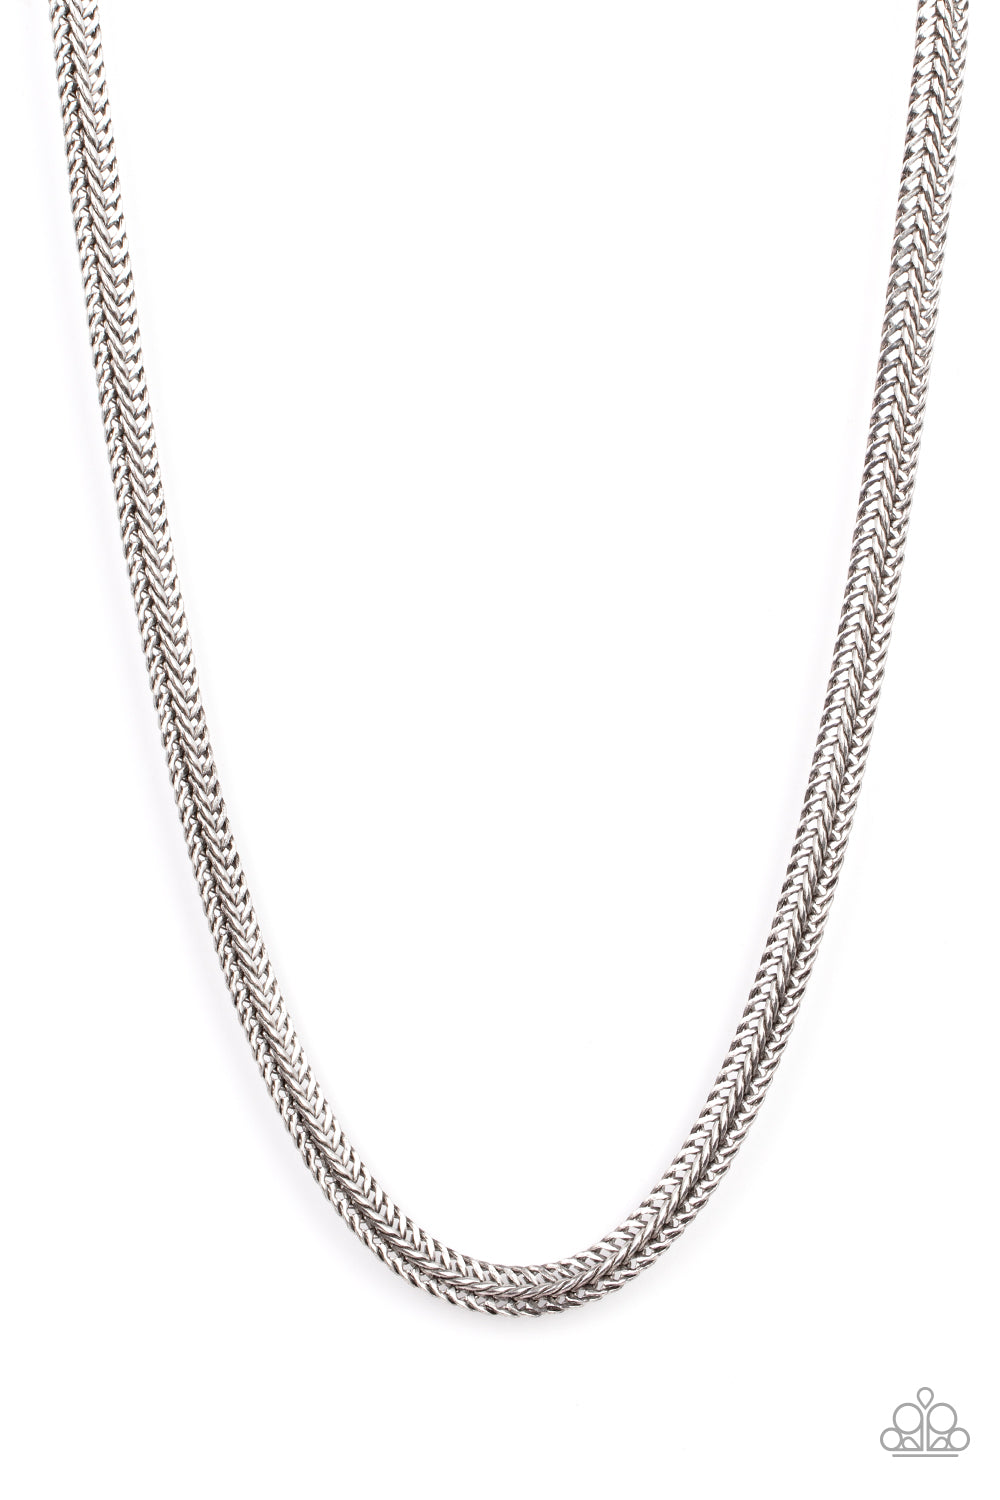 Modern Motorhead Accessories Sugar Bee Chain - - Urban Paparazzi – Necklace Jewelry and Bling Silver